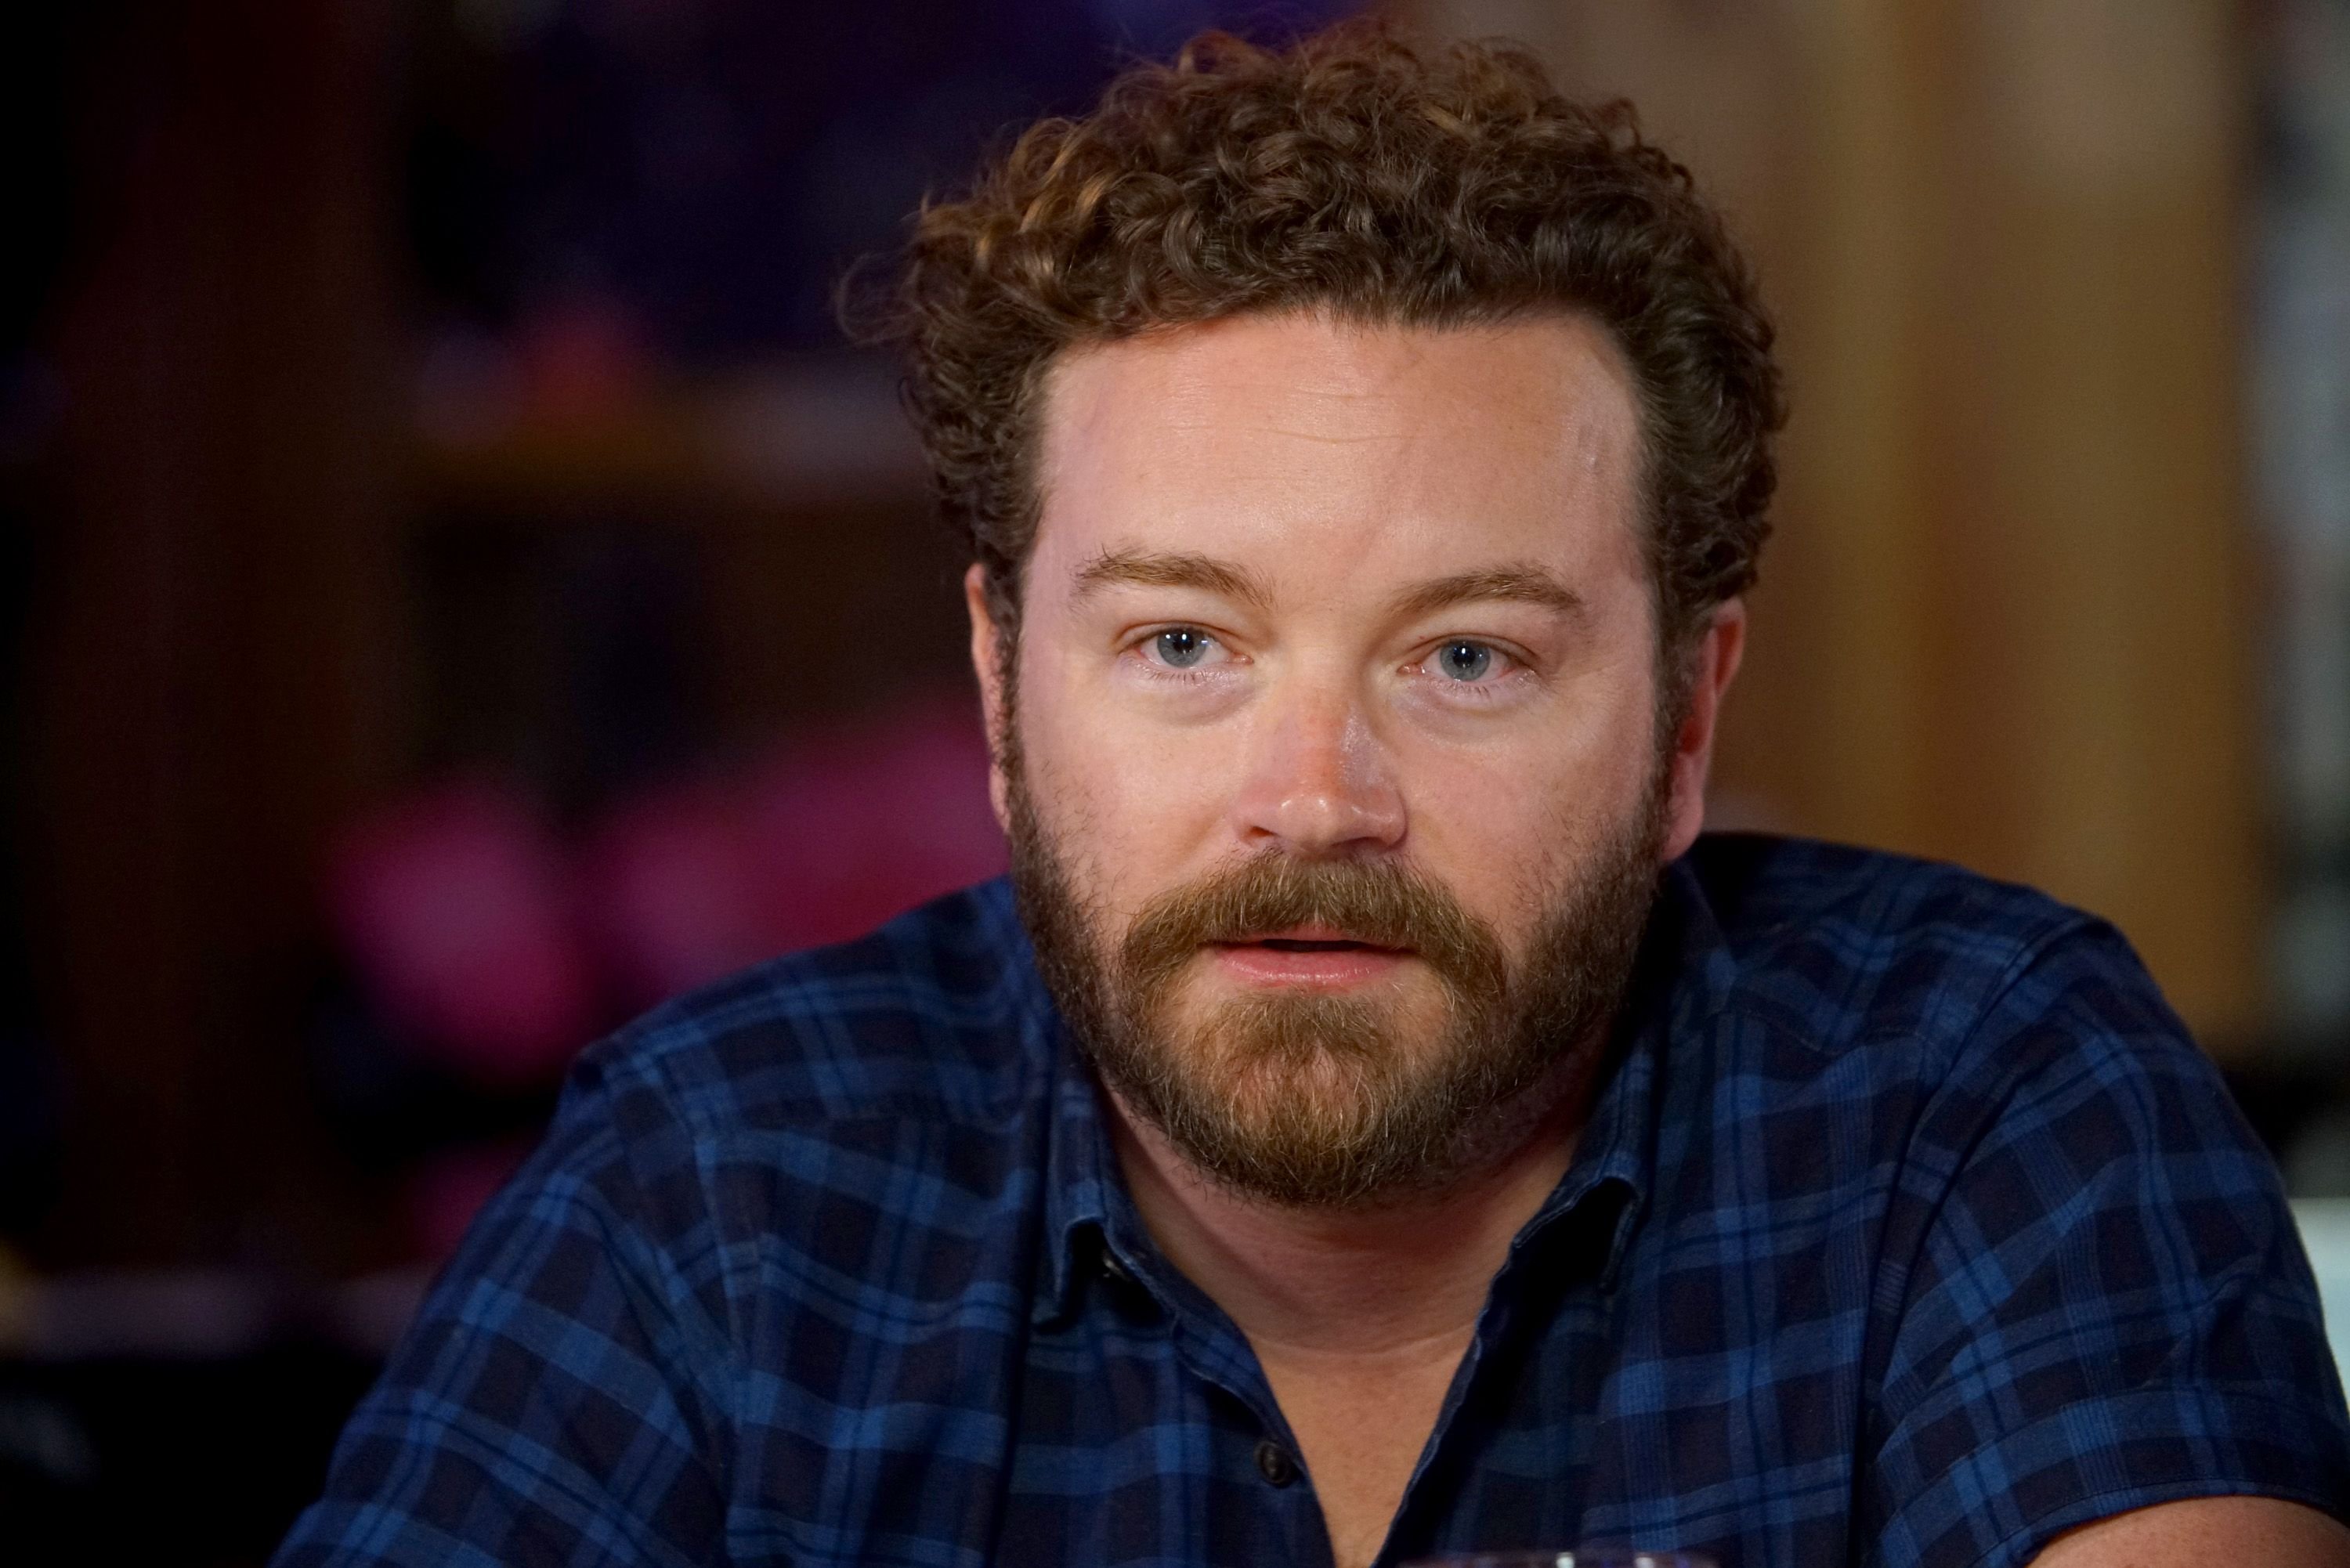 Danny Masterson at a launch event for "The Ranch: Part 3" on June 7, 2017, in Nashville, Tennessee | Photo: Getty Images